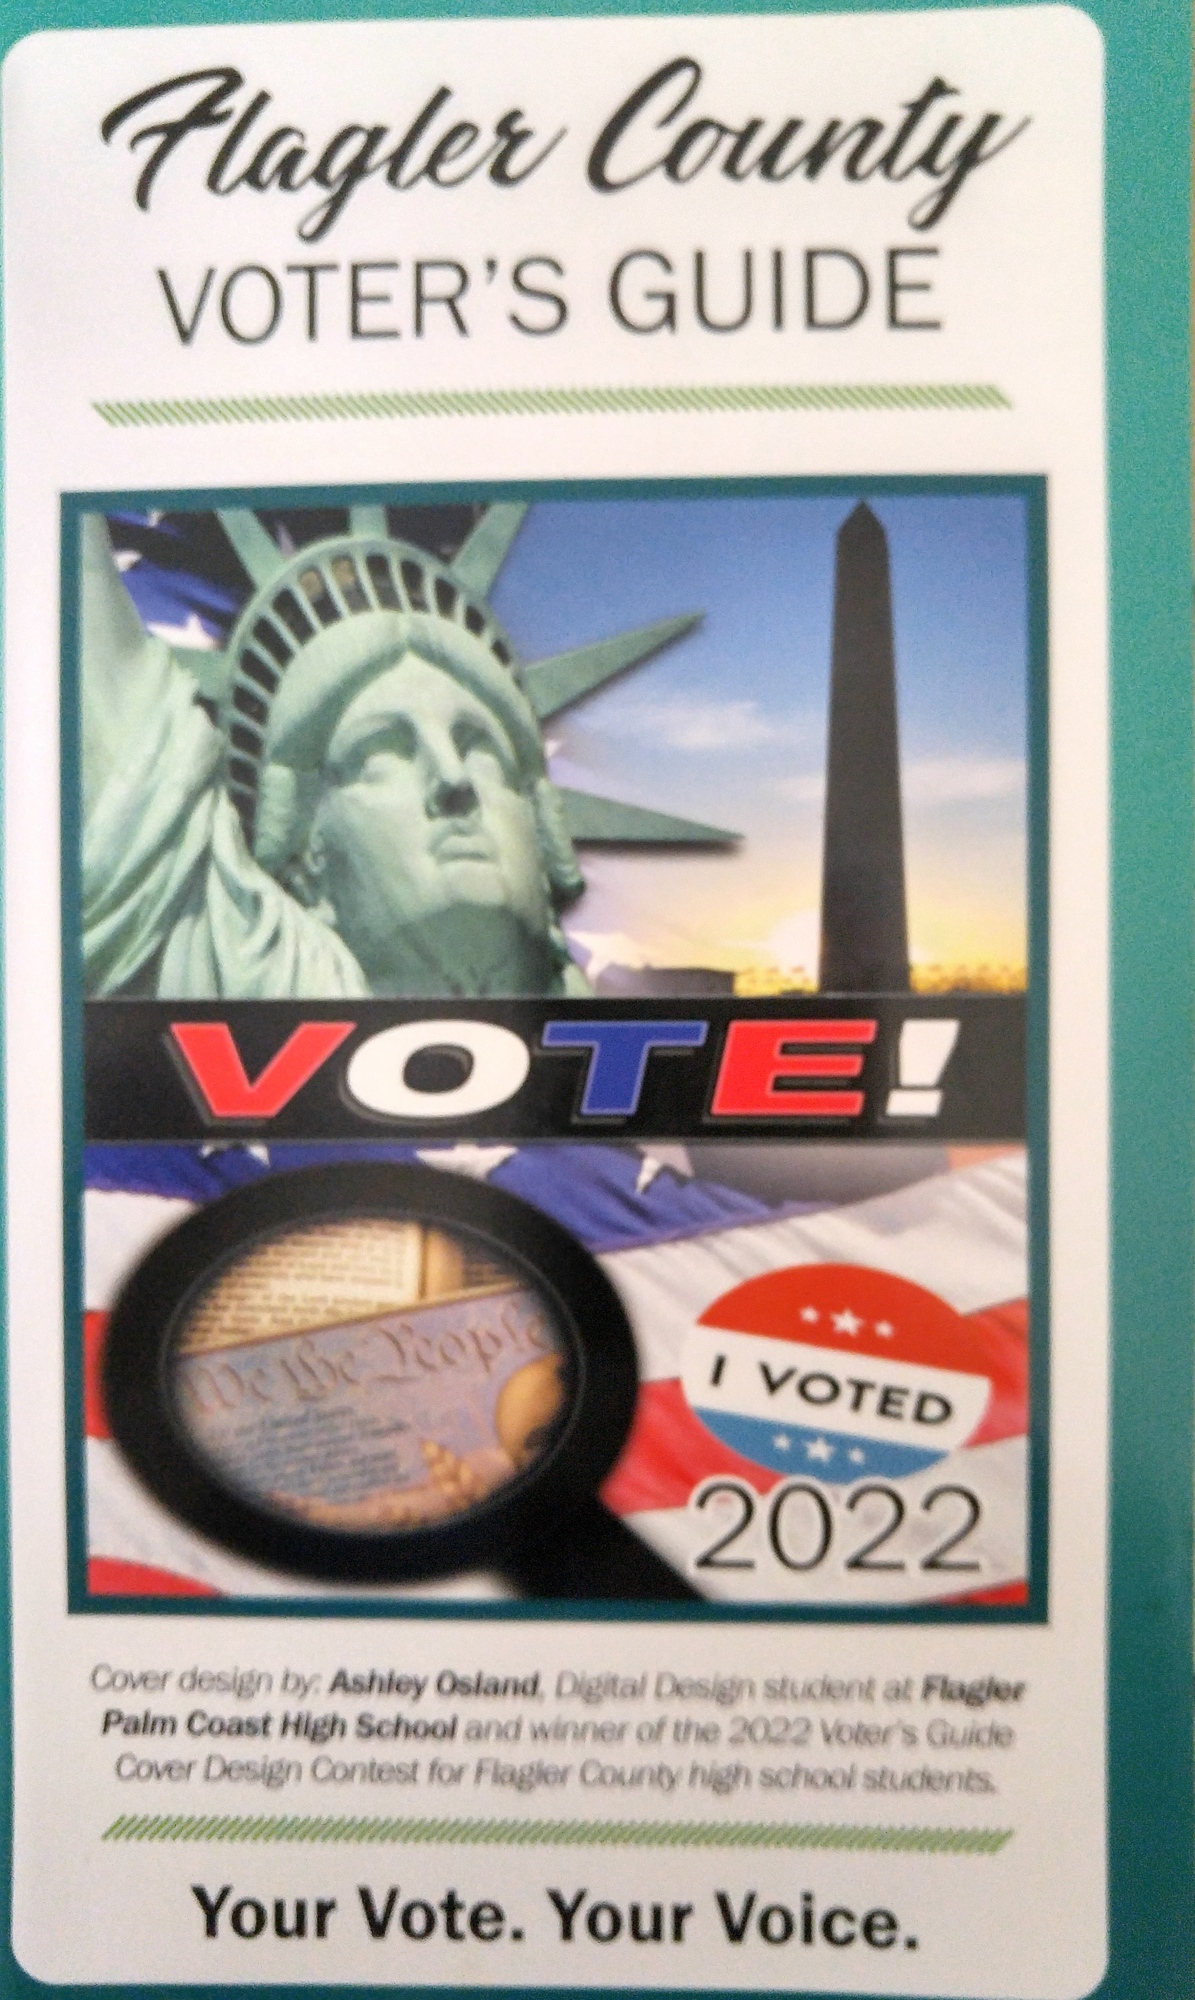 The Flagler County Voter's Guide with cover design by FPC digital design student Ashley Osland.